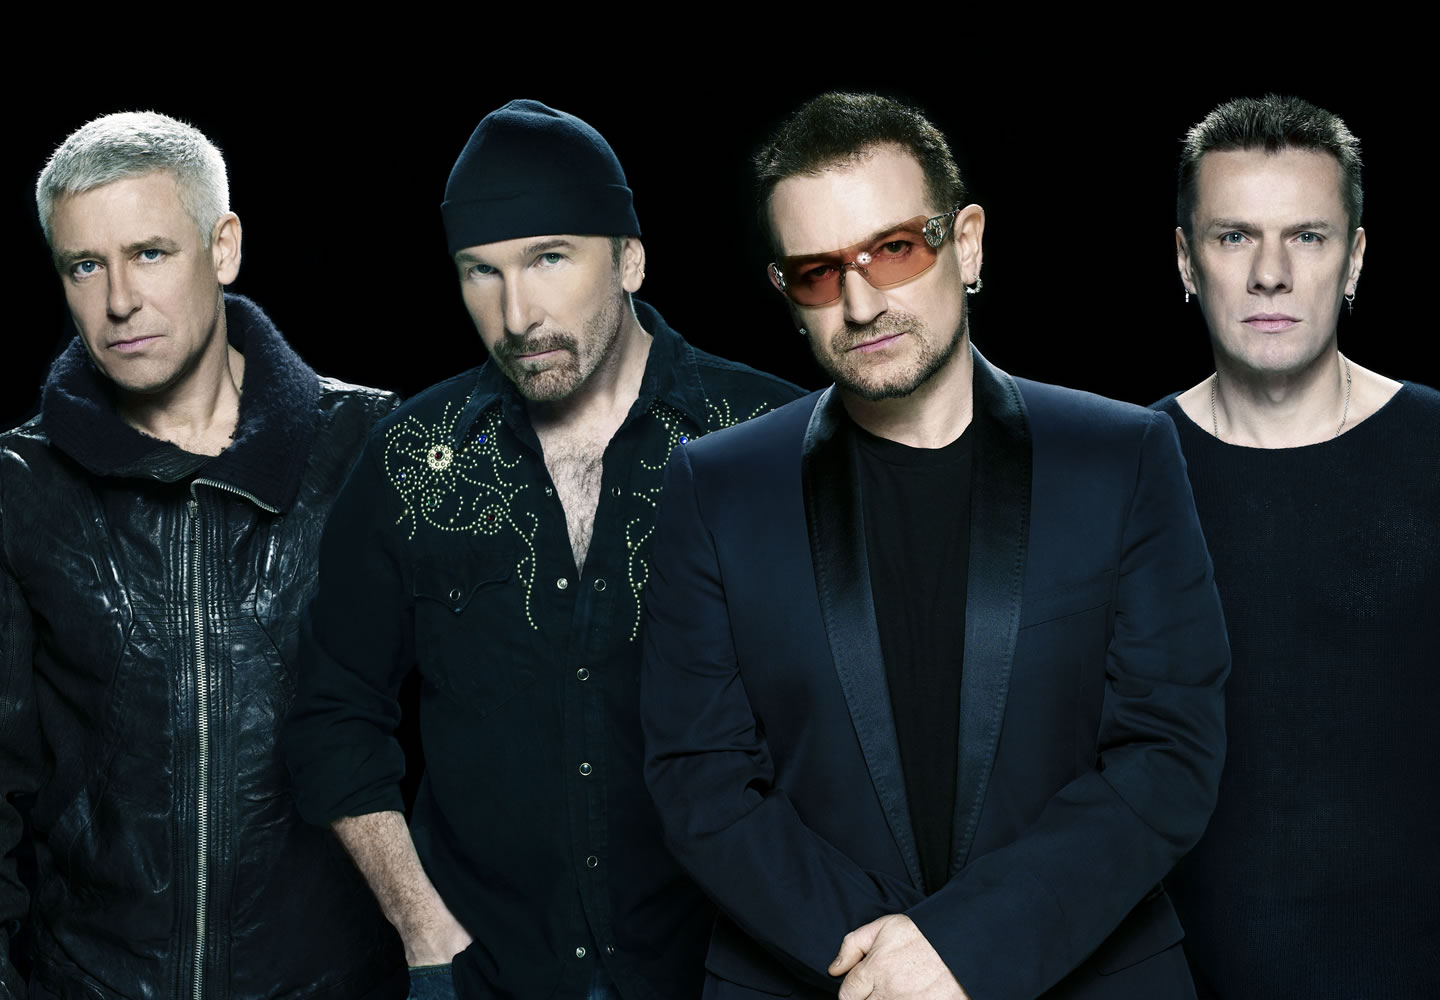 Glenn's team supports U2 World Tour for second consecutive year